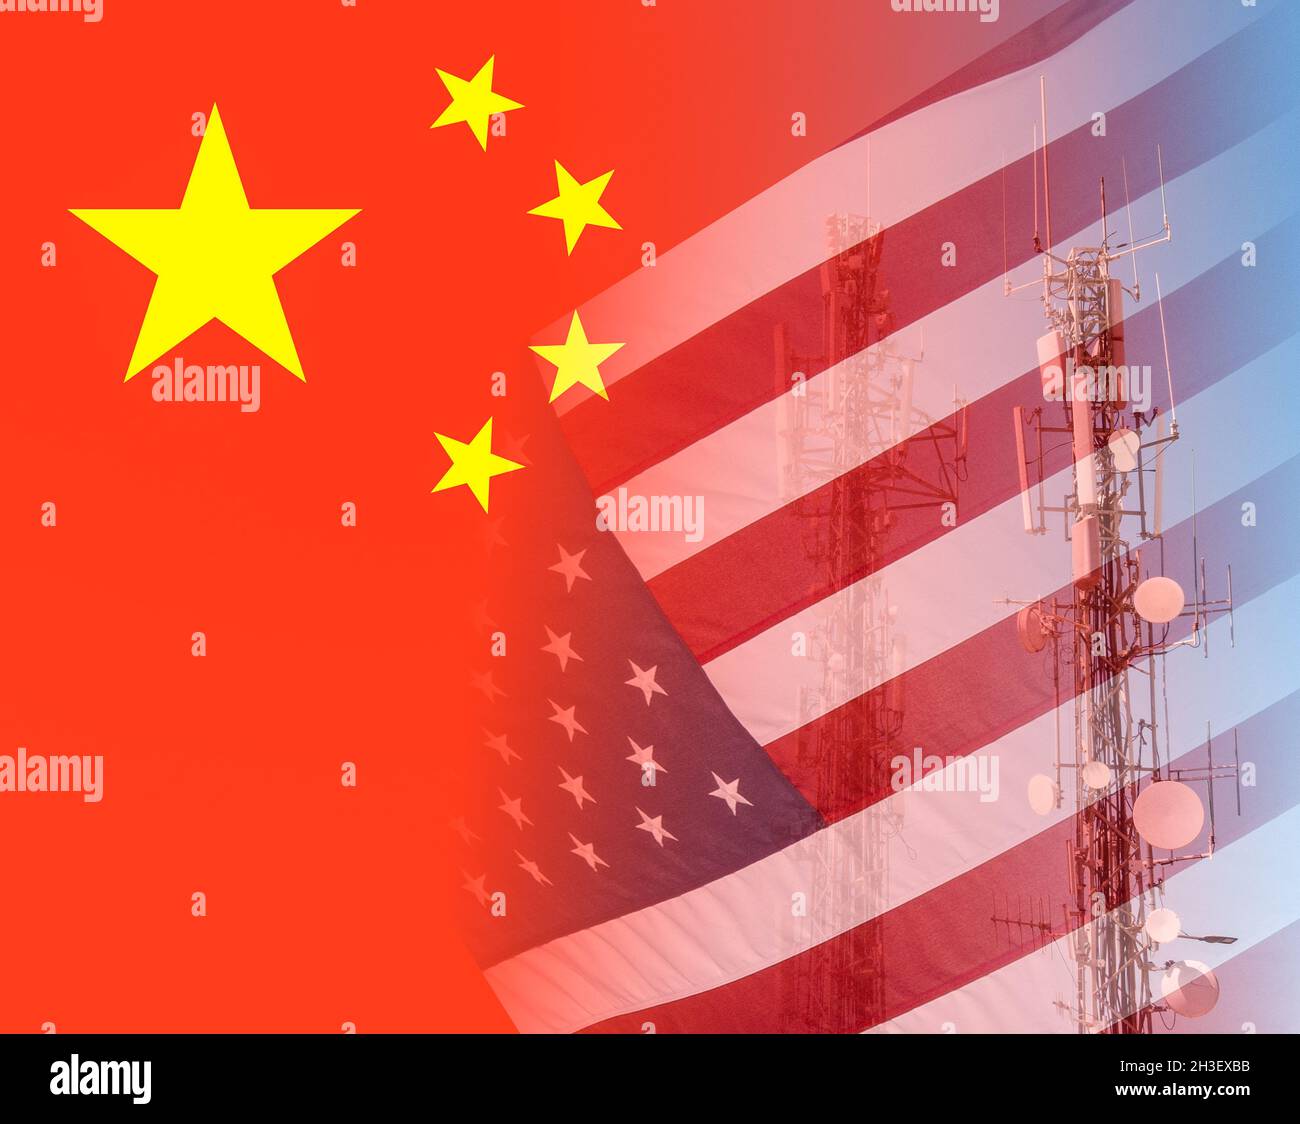 Flags of China and USA blended with image of mobile phone antennas. China Telecom, USA concept. Stock Photo